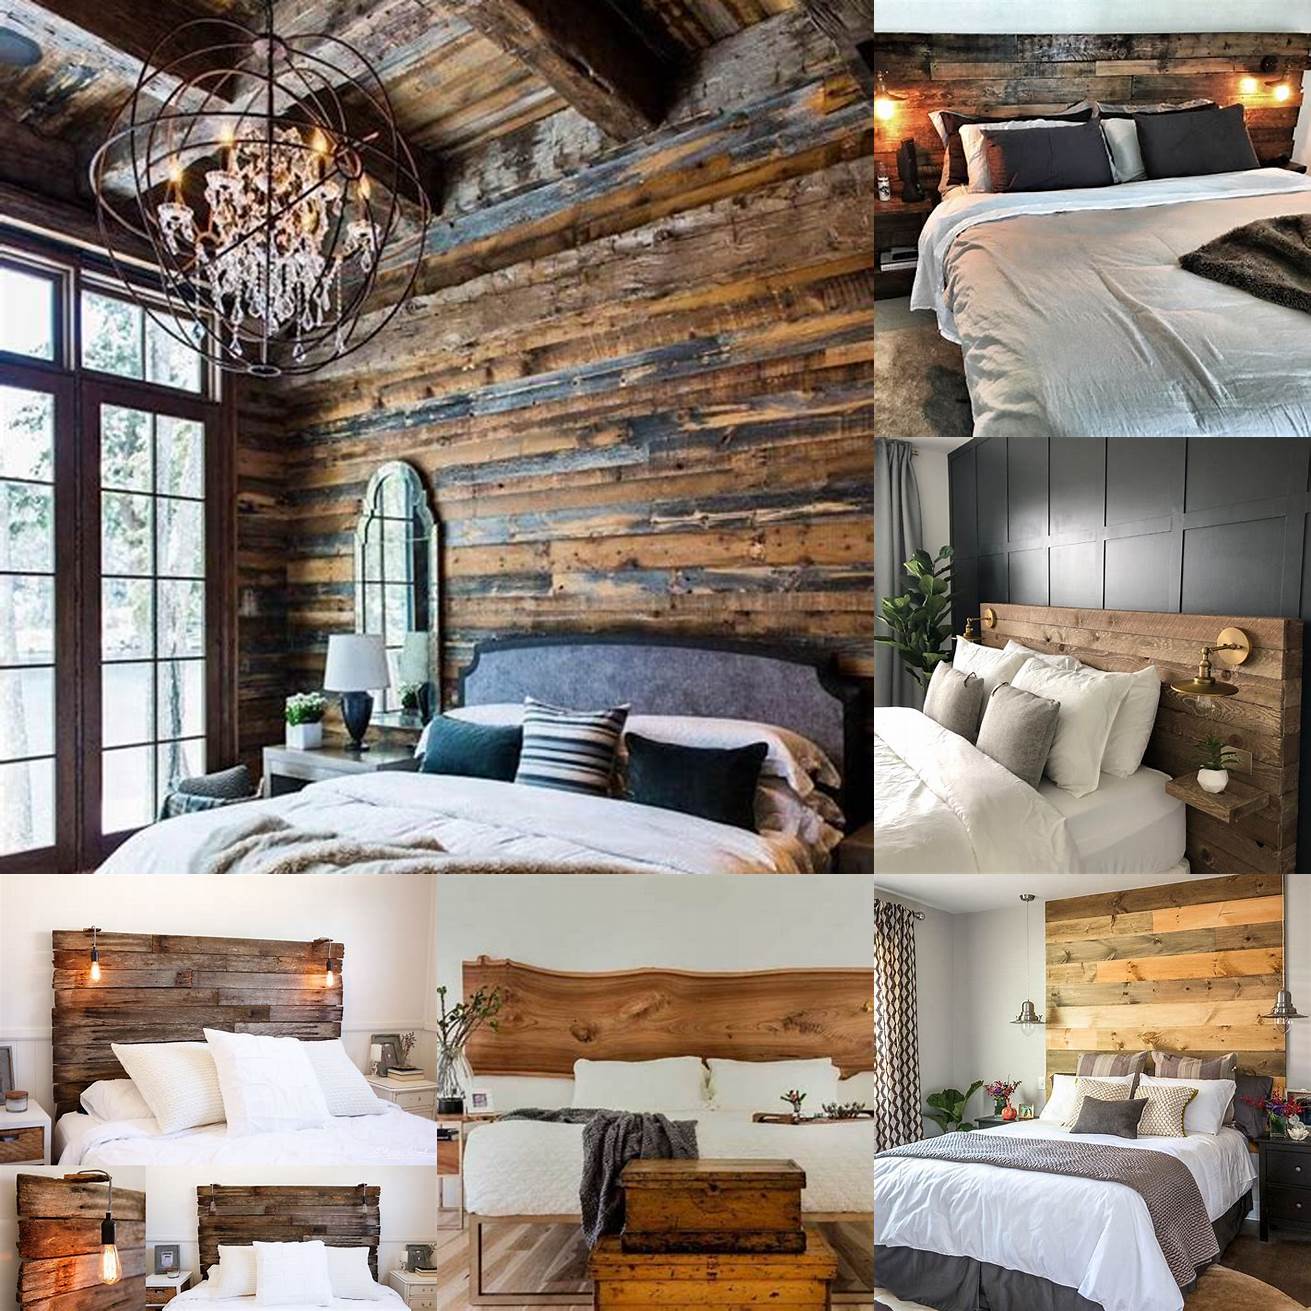 This rustic modern bedroom features a natural wood headboard clean white bedding and industrial-style lighting